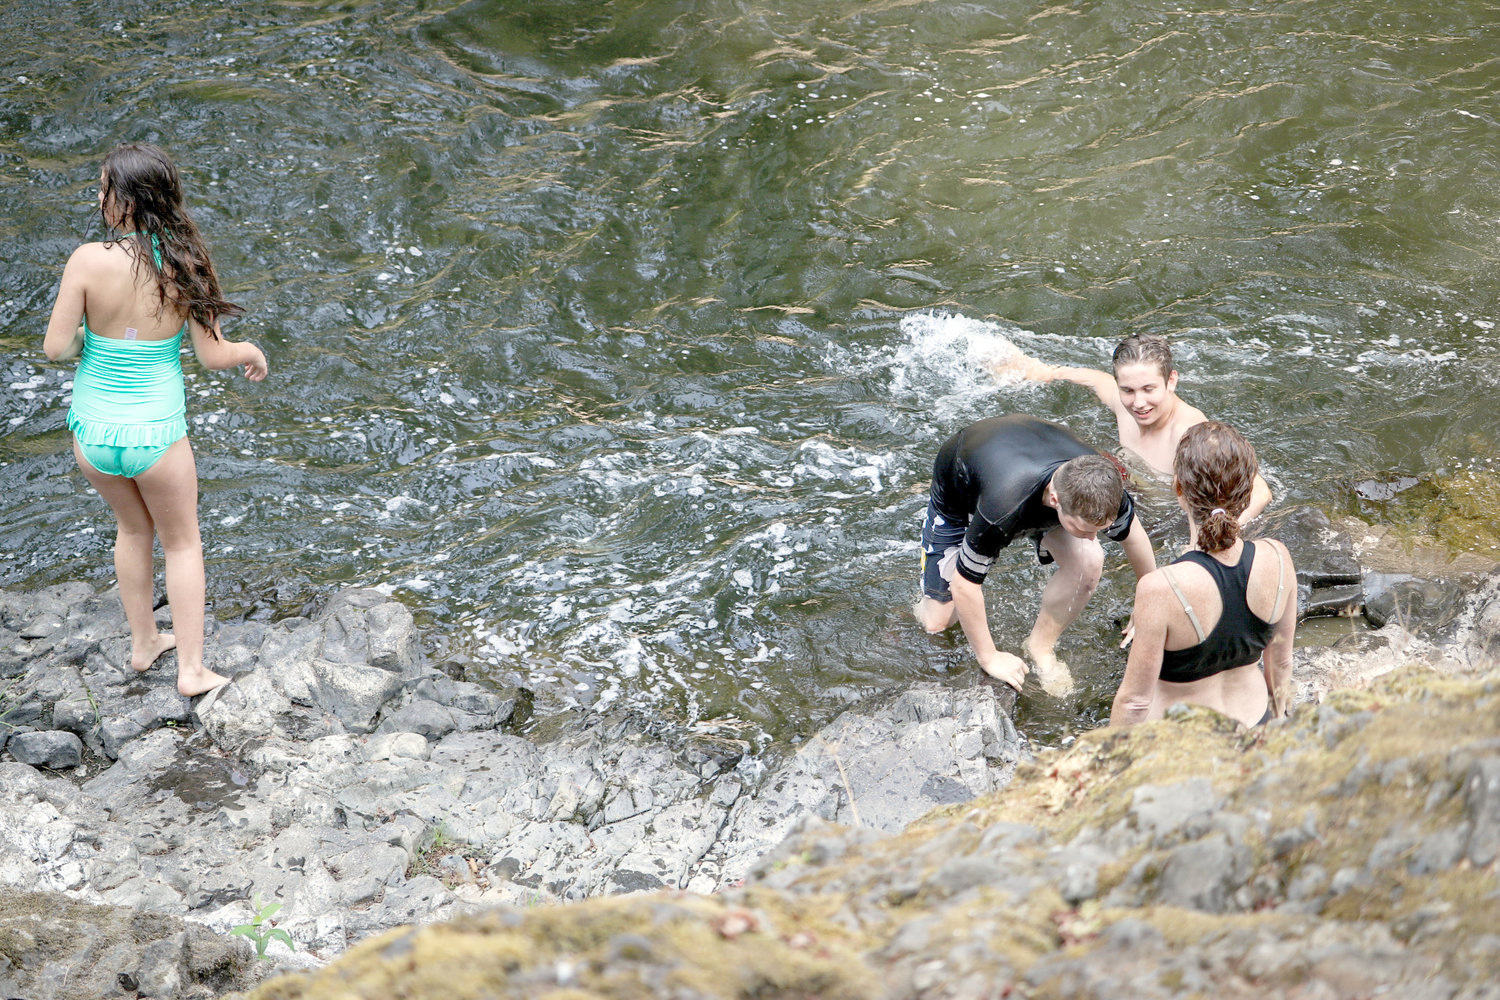 2017 FILE PHOTO — A family visiting from Texas hopped into the waters at Rainbow Falls.